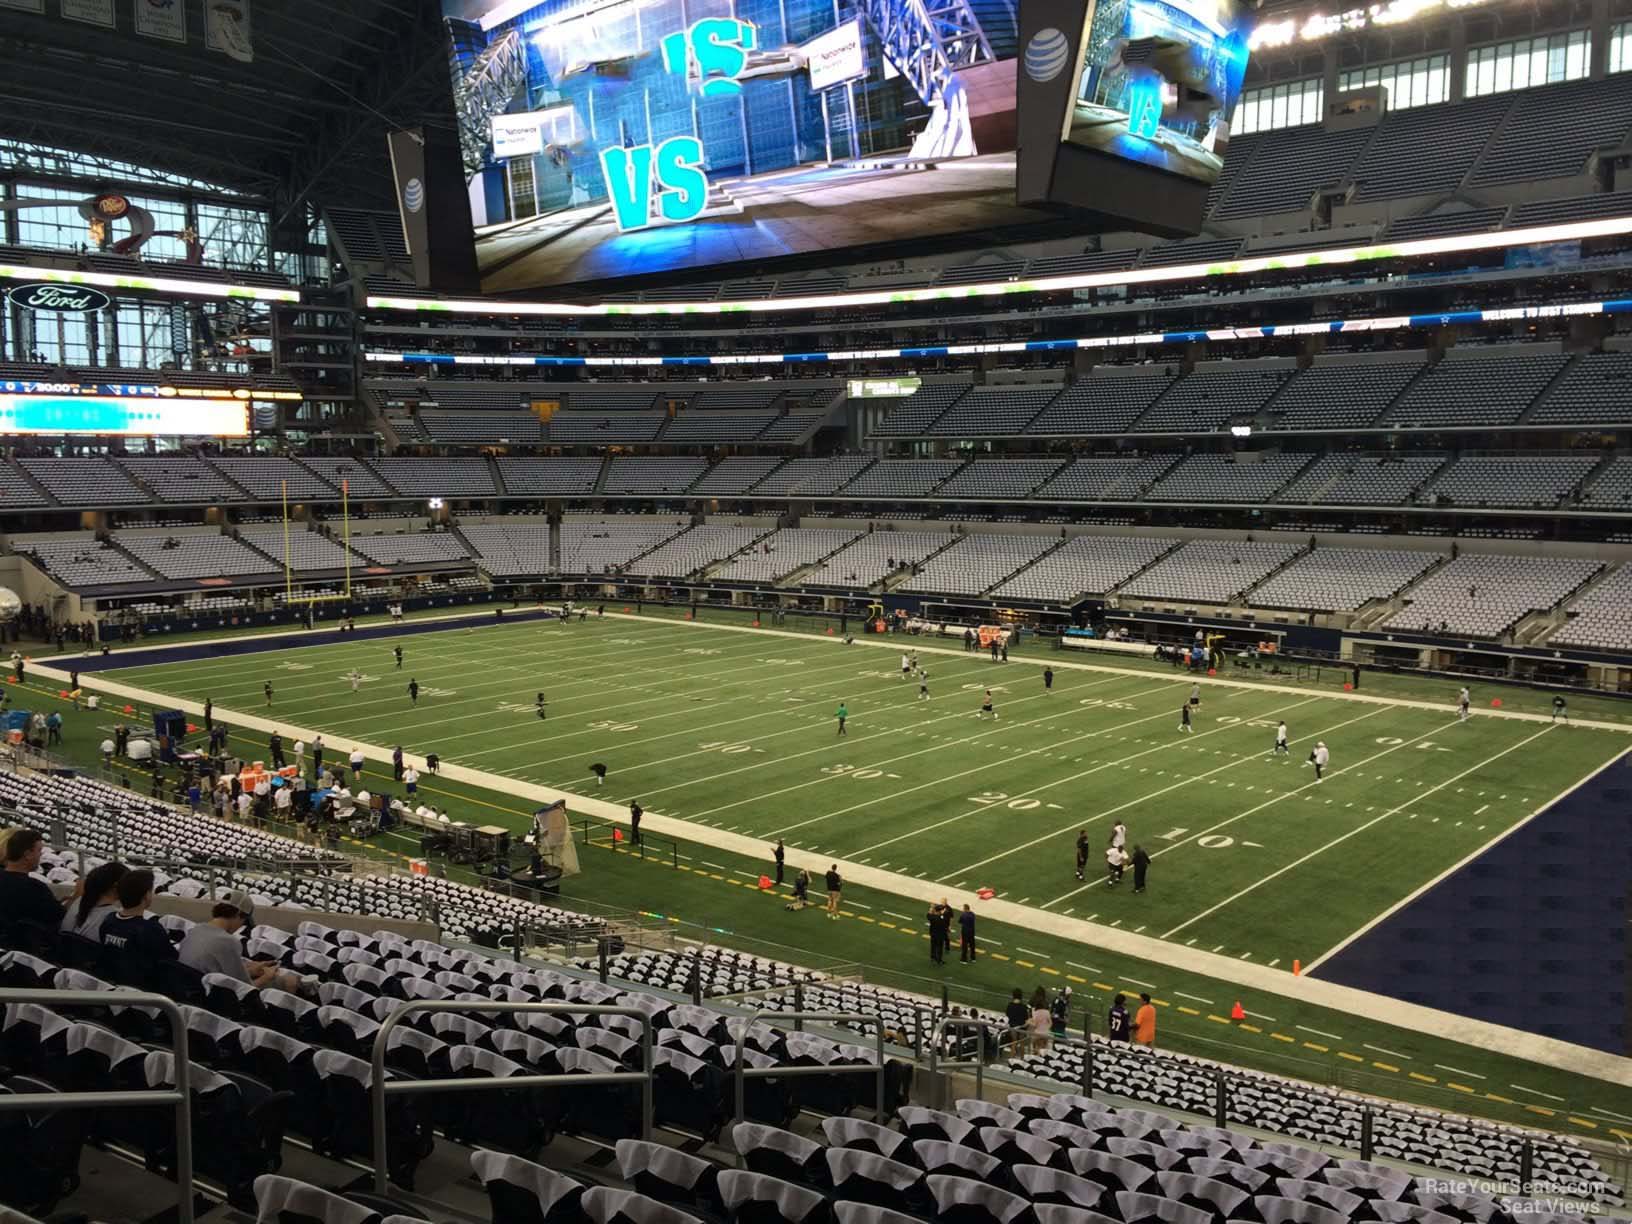 section 229, row 13 seat view  for football - at&t stadium (cowboys stadium)